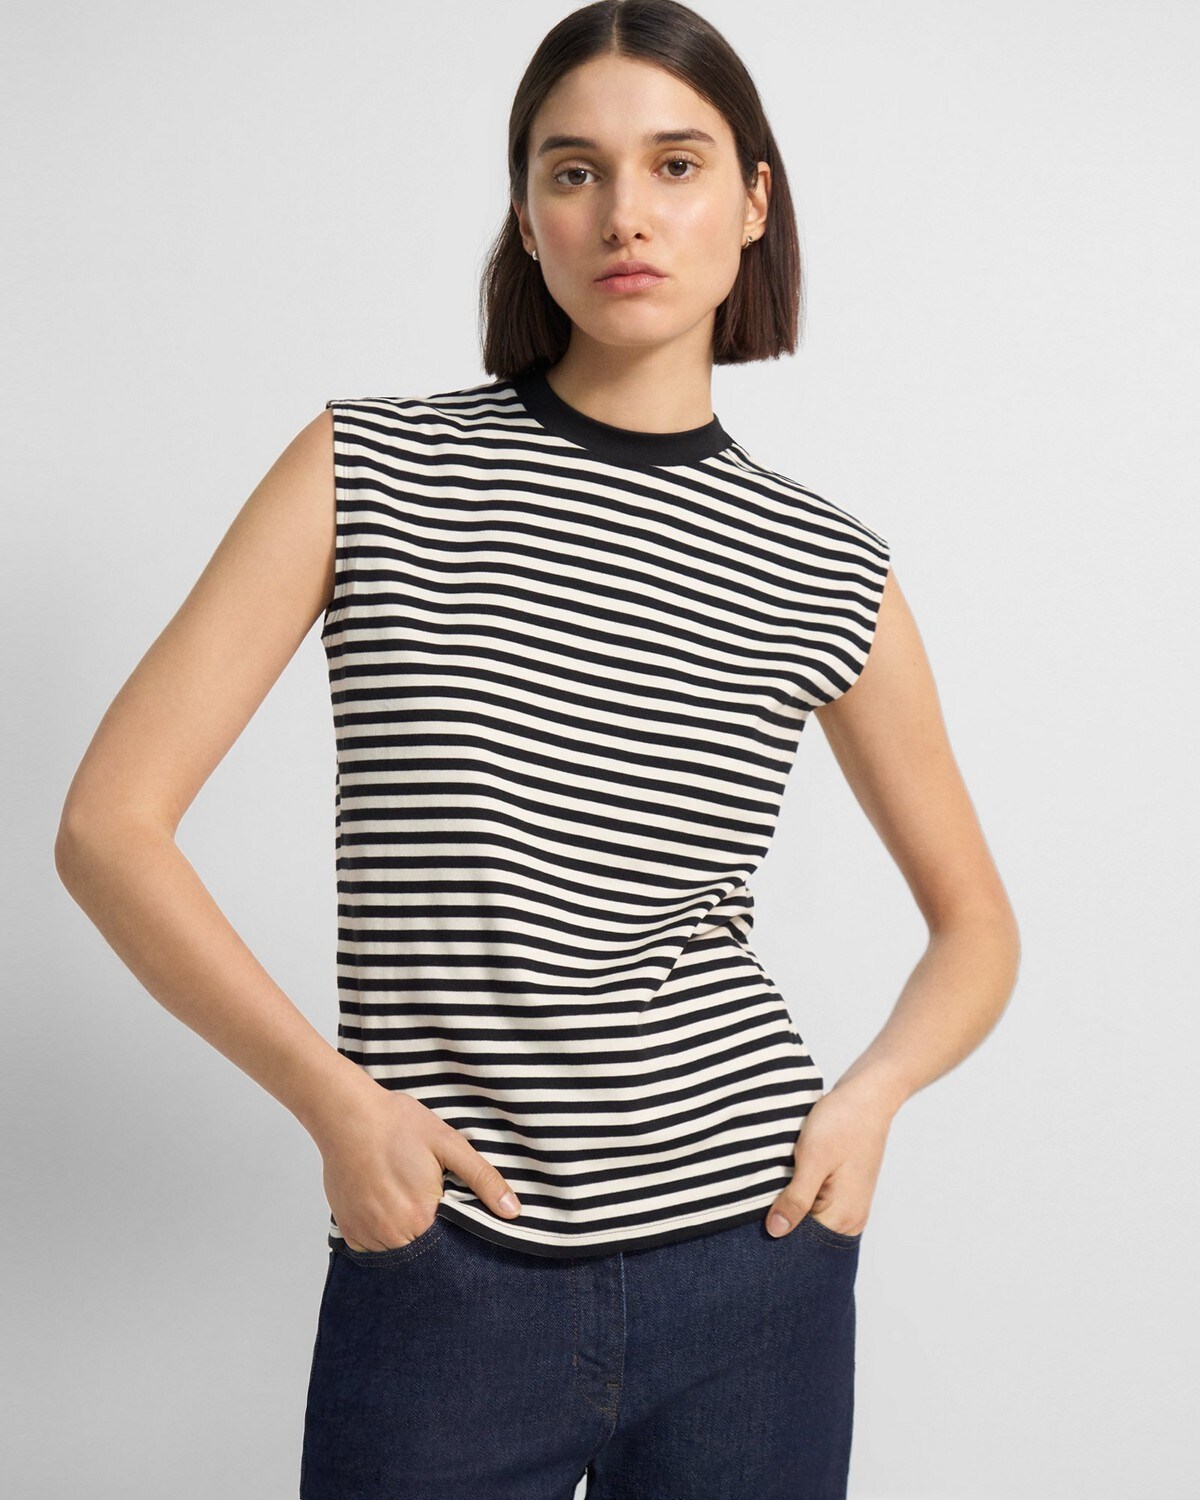 Perfect Cut-Off Tee in Striped Cotton Jersey